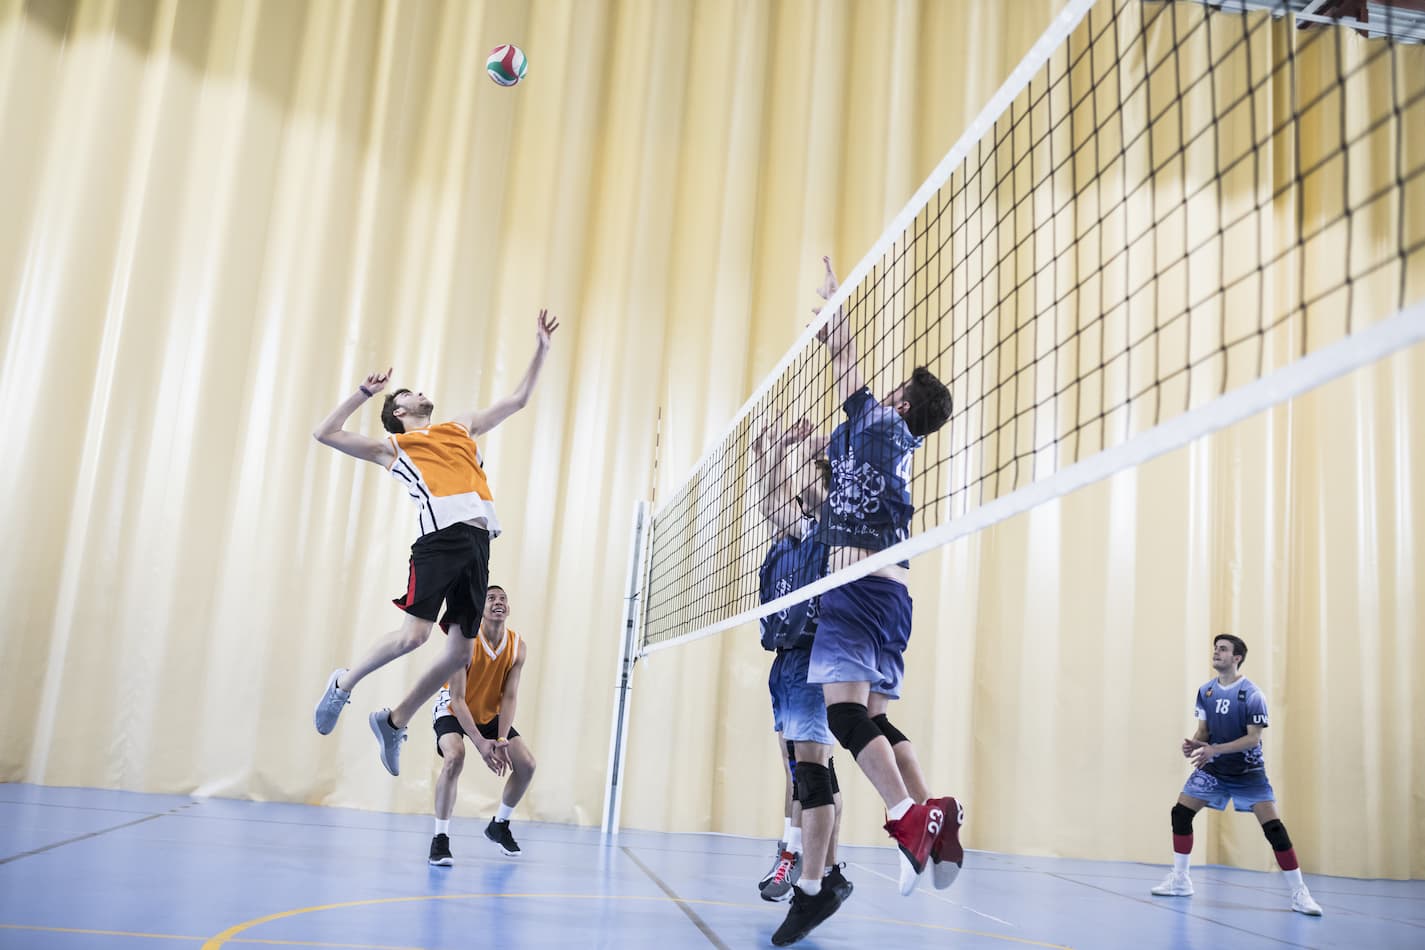 An image of a man jumping during a volleyball match against the opponent team.